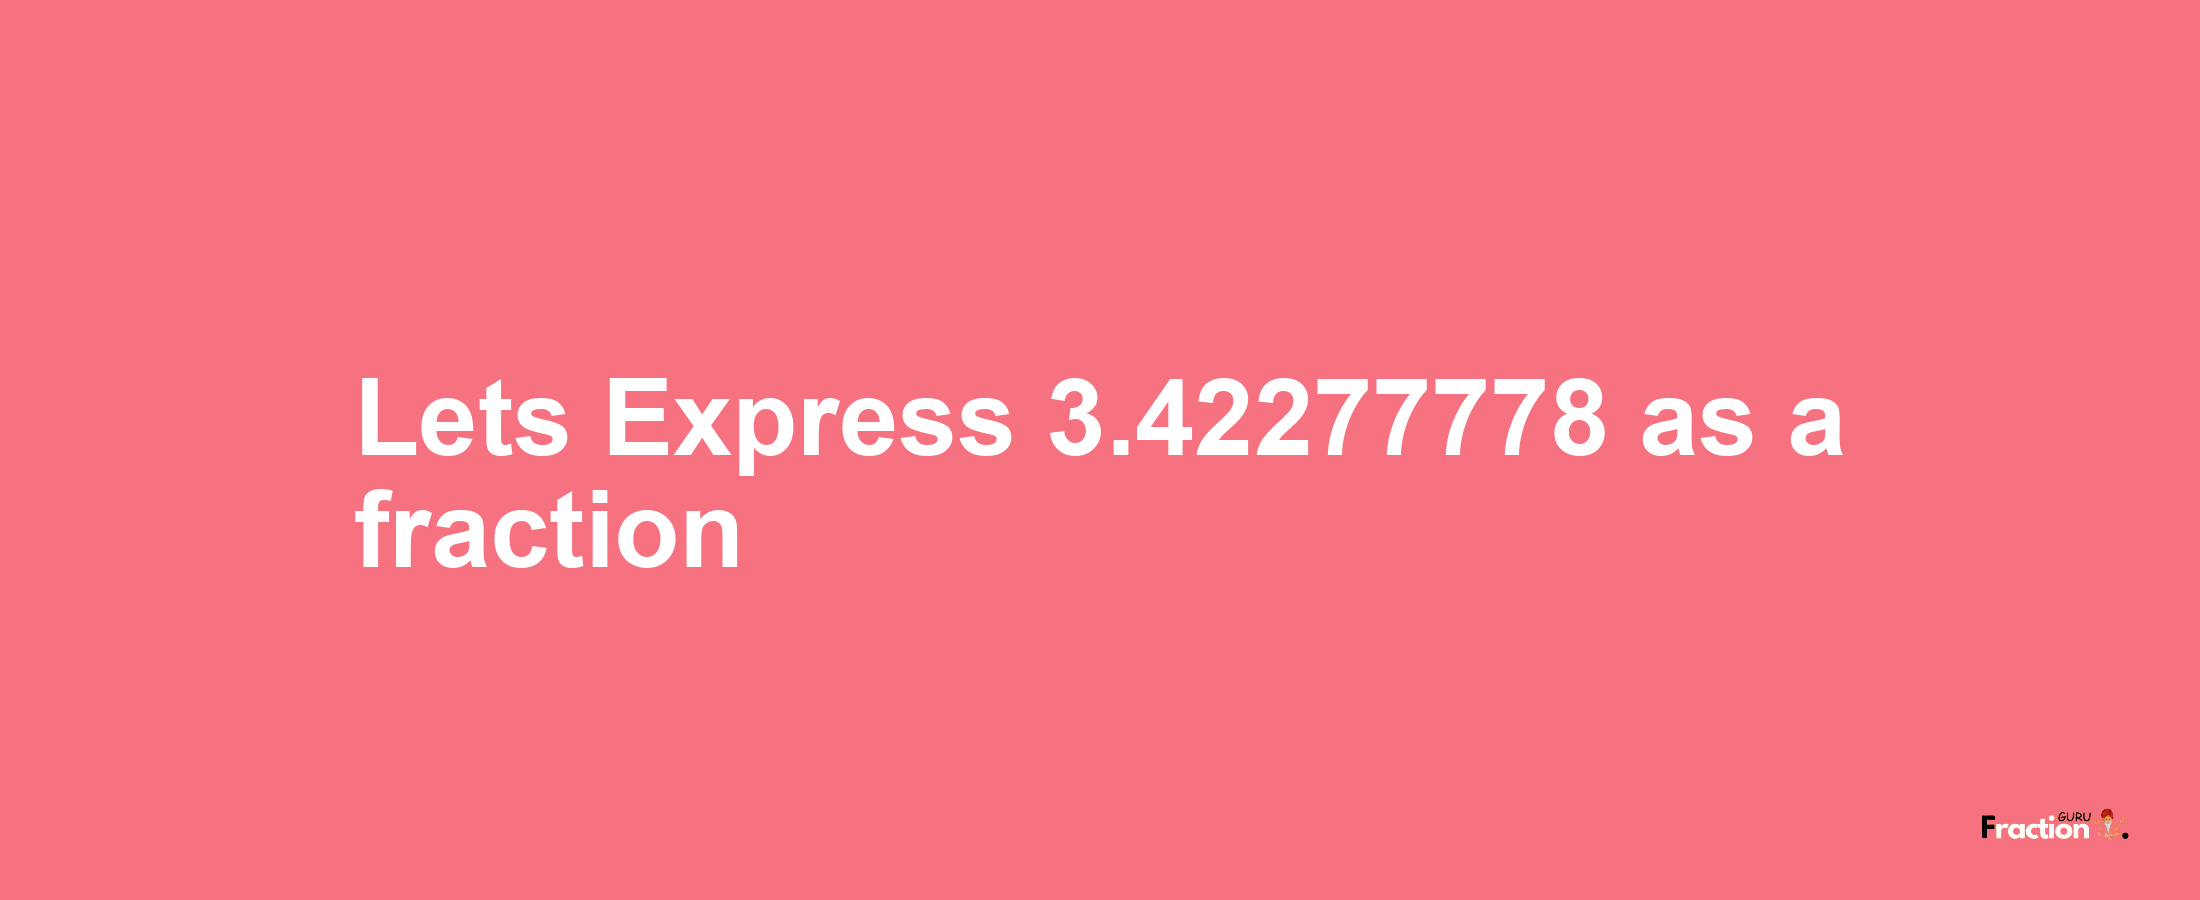 Lets Express 3.42277778 as afraction